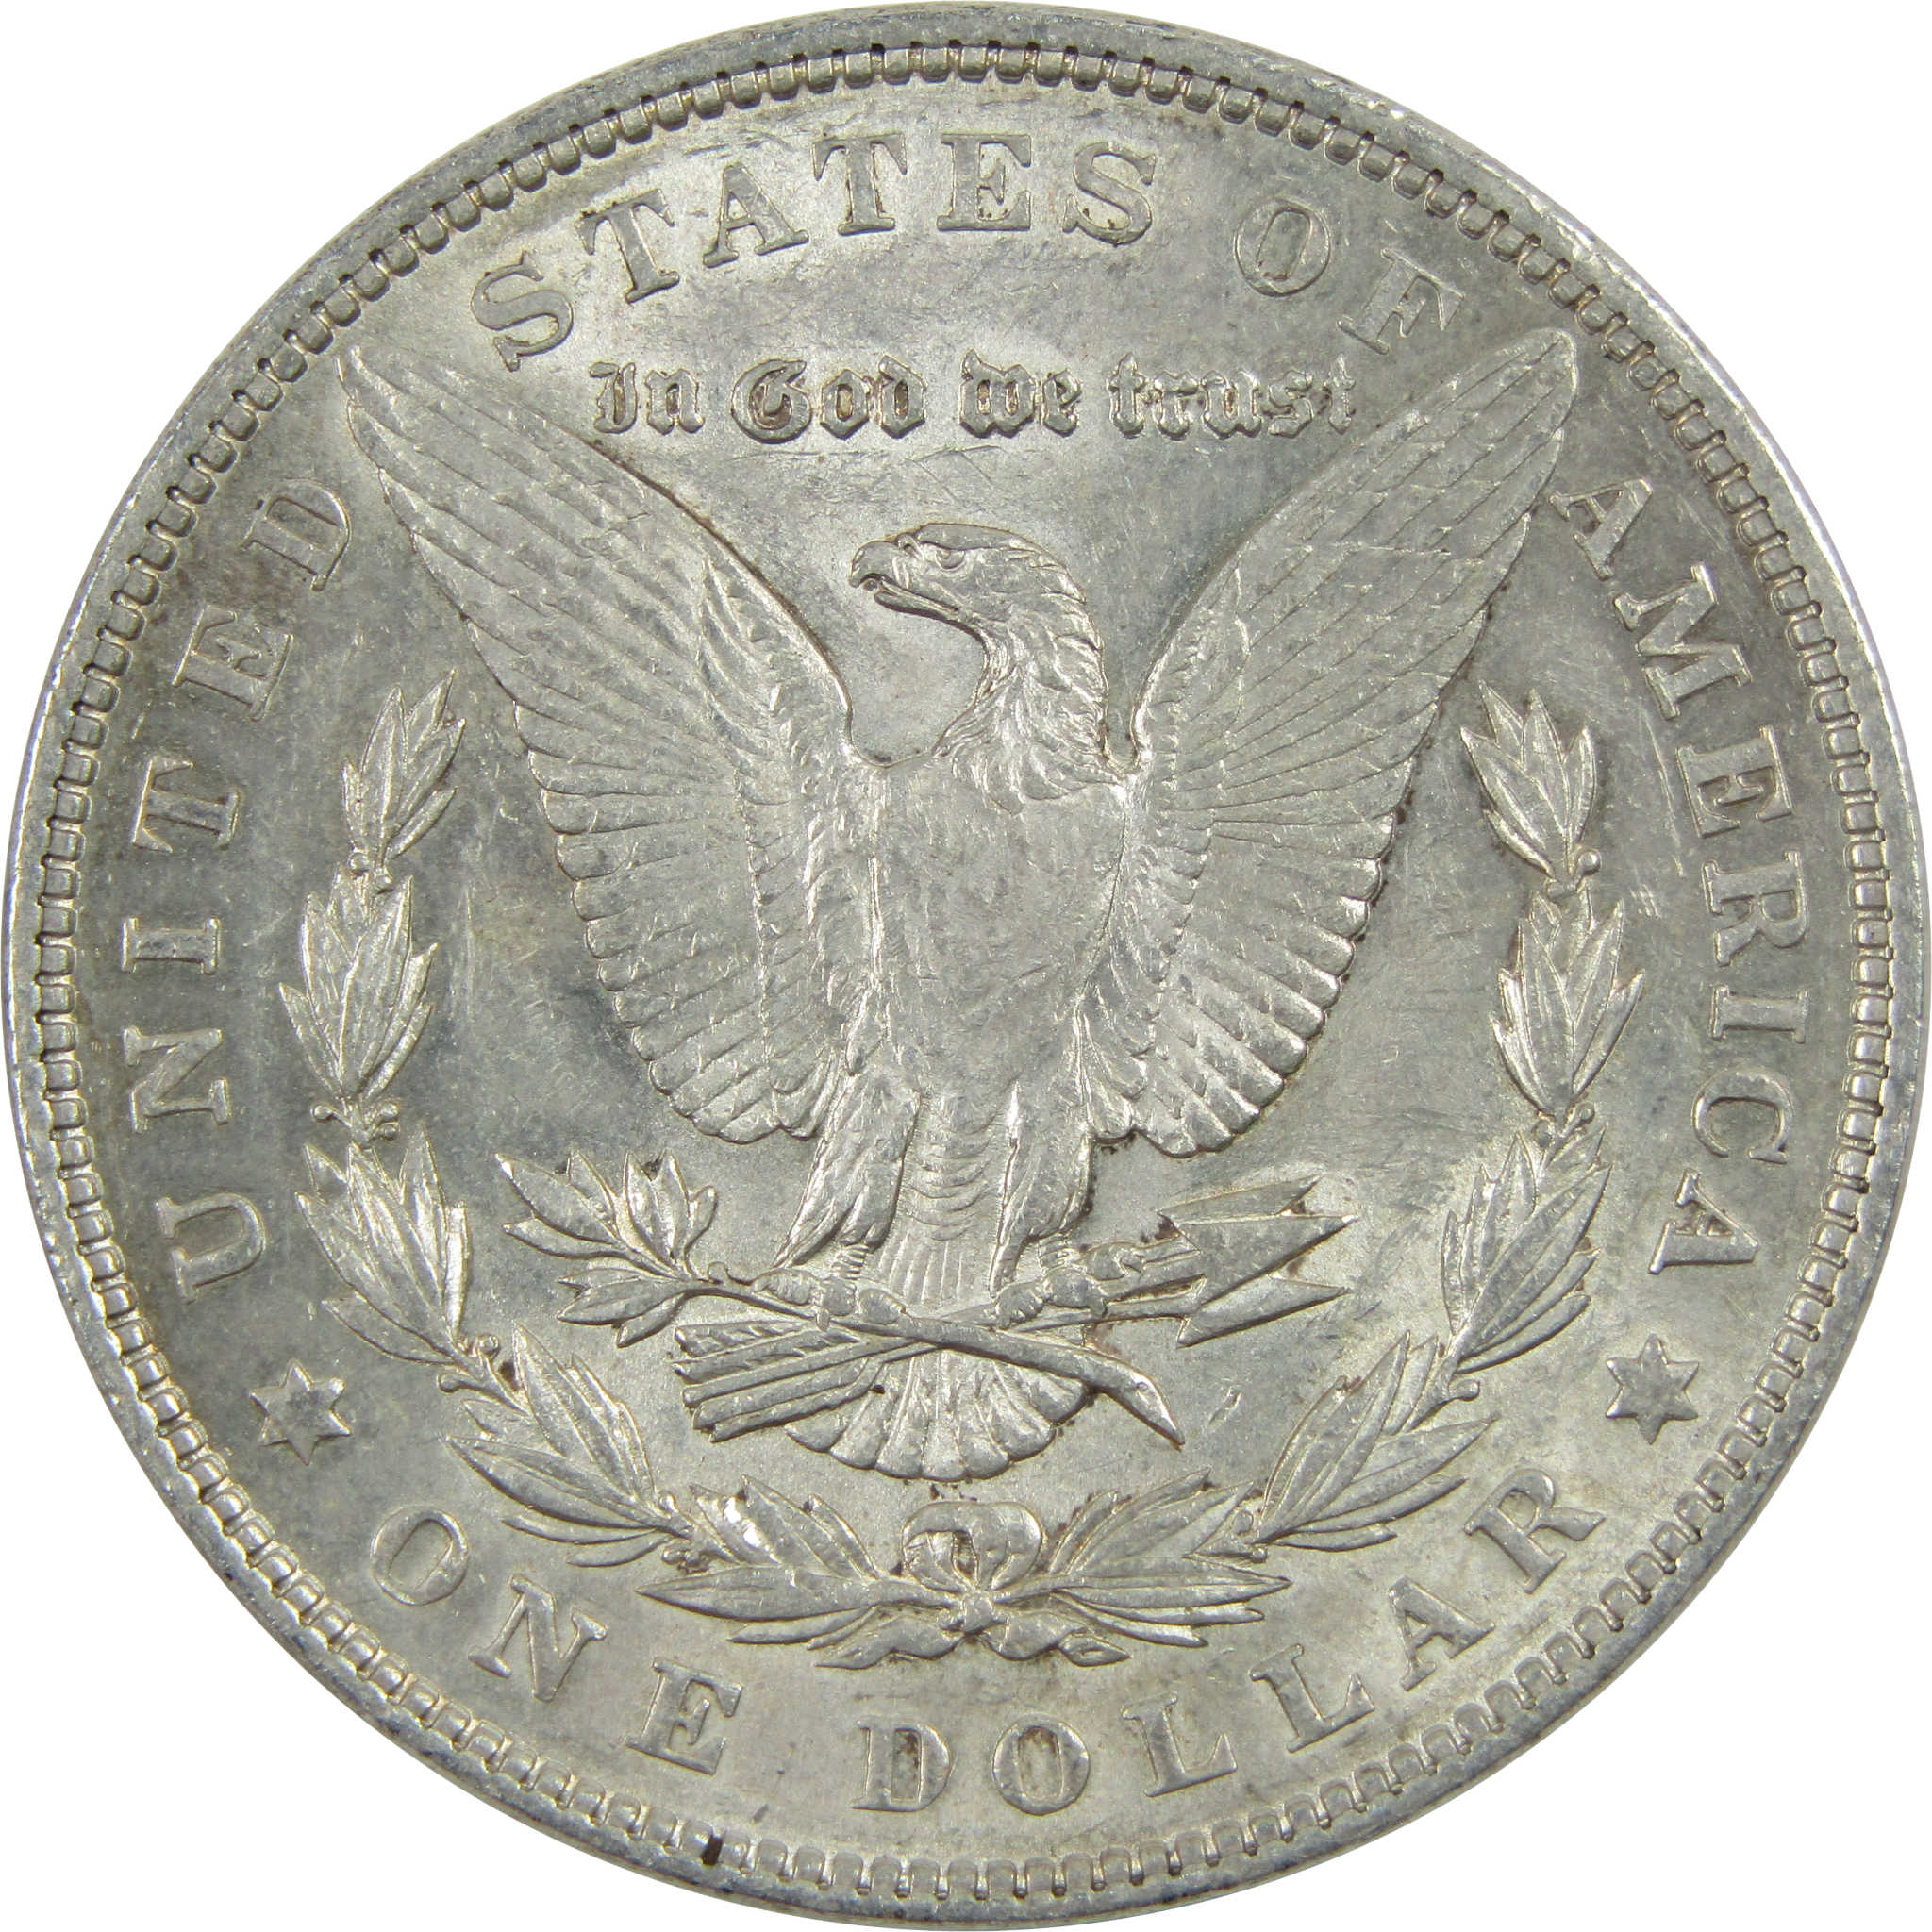 1904 Morgan Dollar AU About Uncirculated Silver $1 Coin SKU:I13363 - Morgan coin - Morgan silver dollar - Morgan silver dollar for sale - Profile Coins &amp; Collectibles